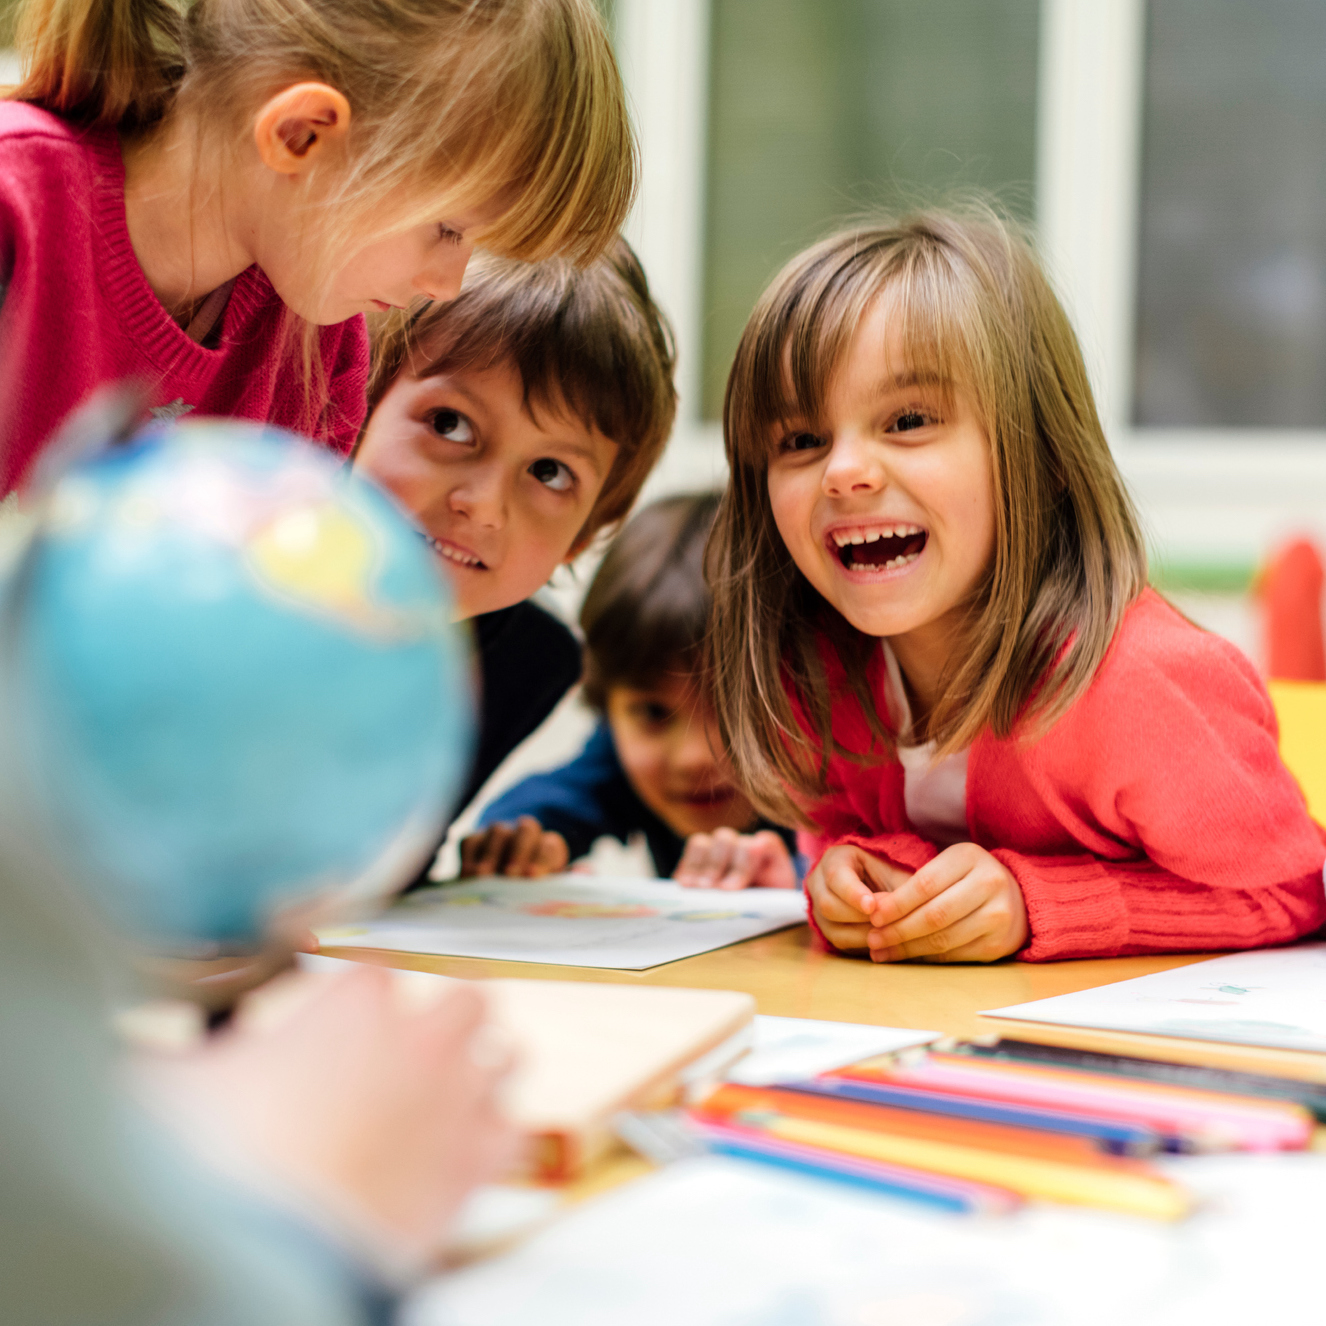 Learn why Prescolaire Early Learning Academy recommends after school education for children.